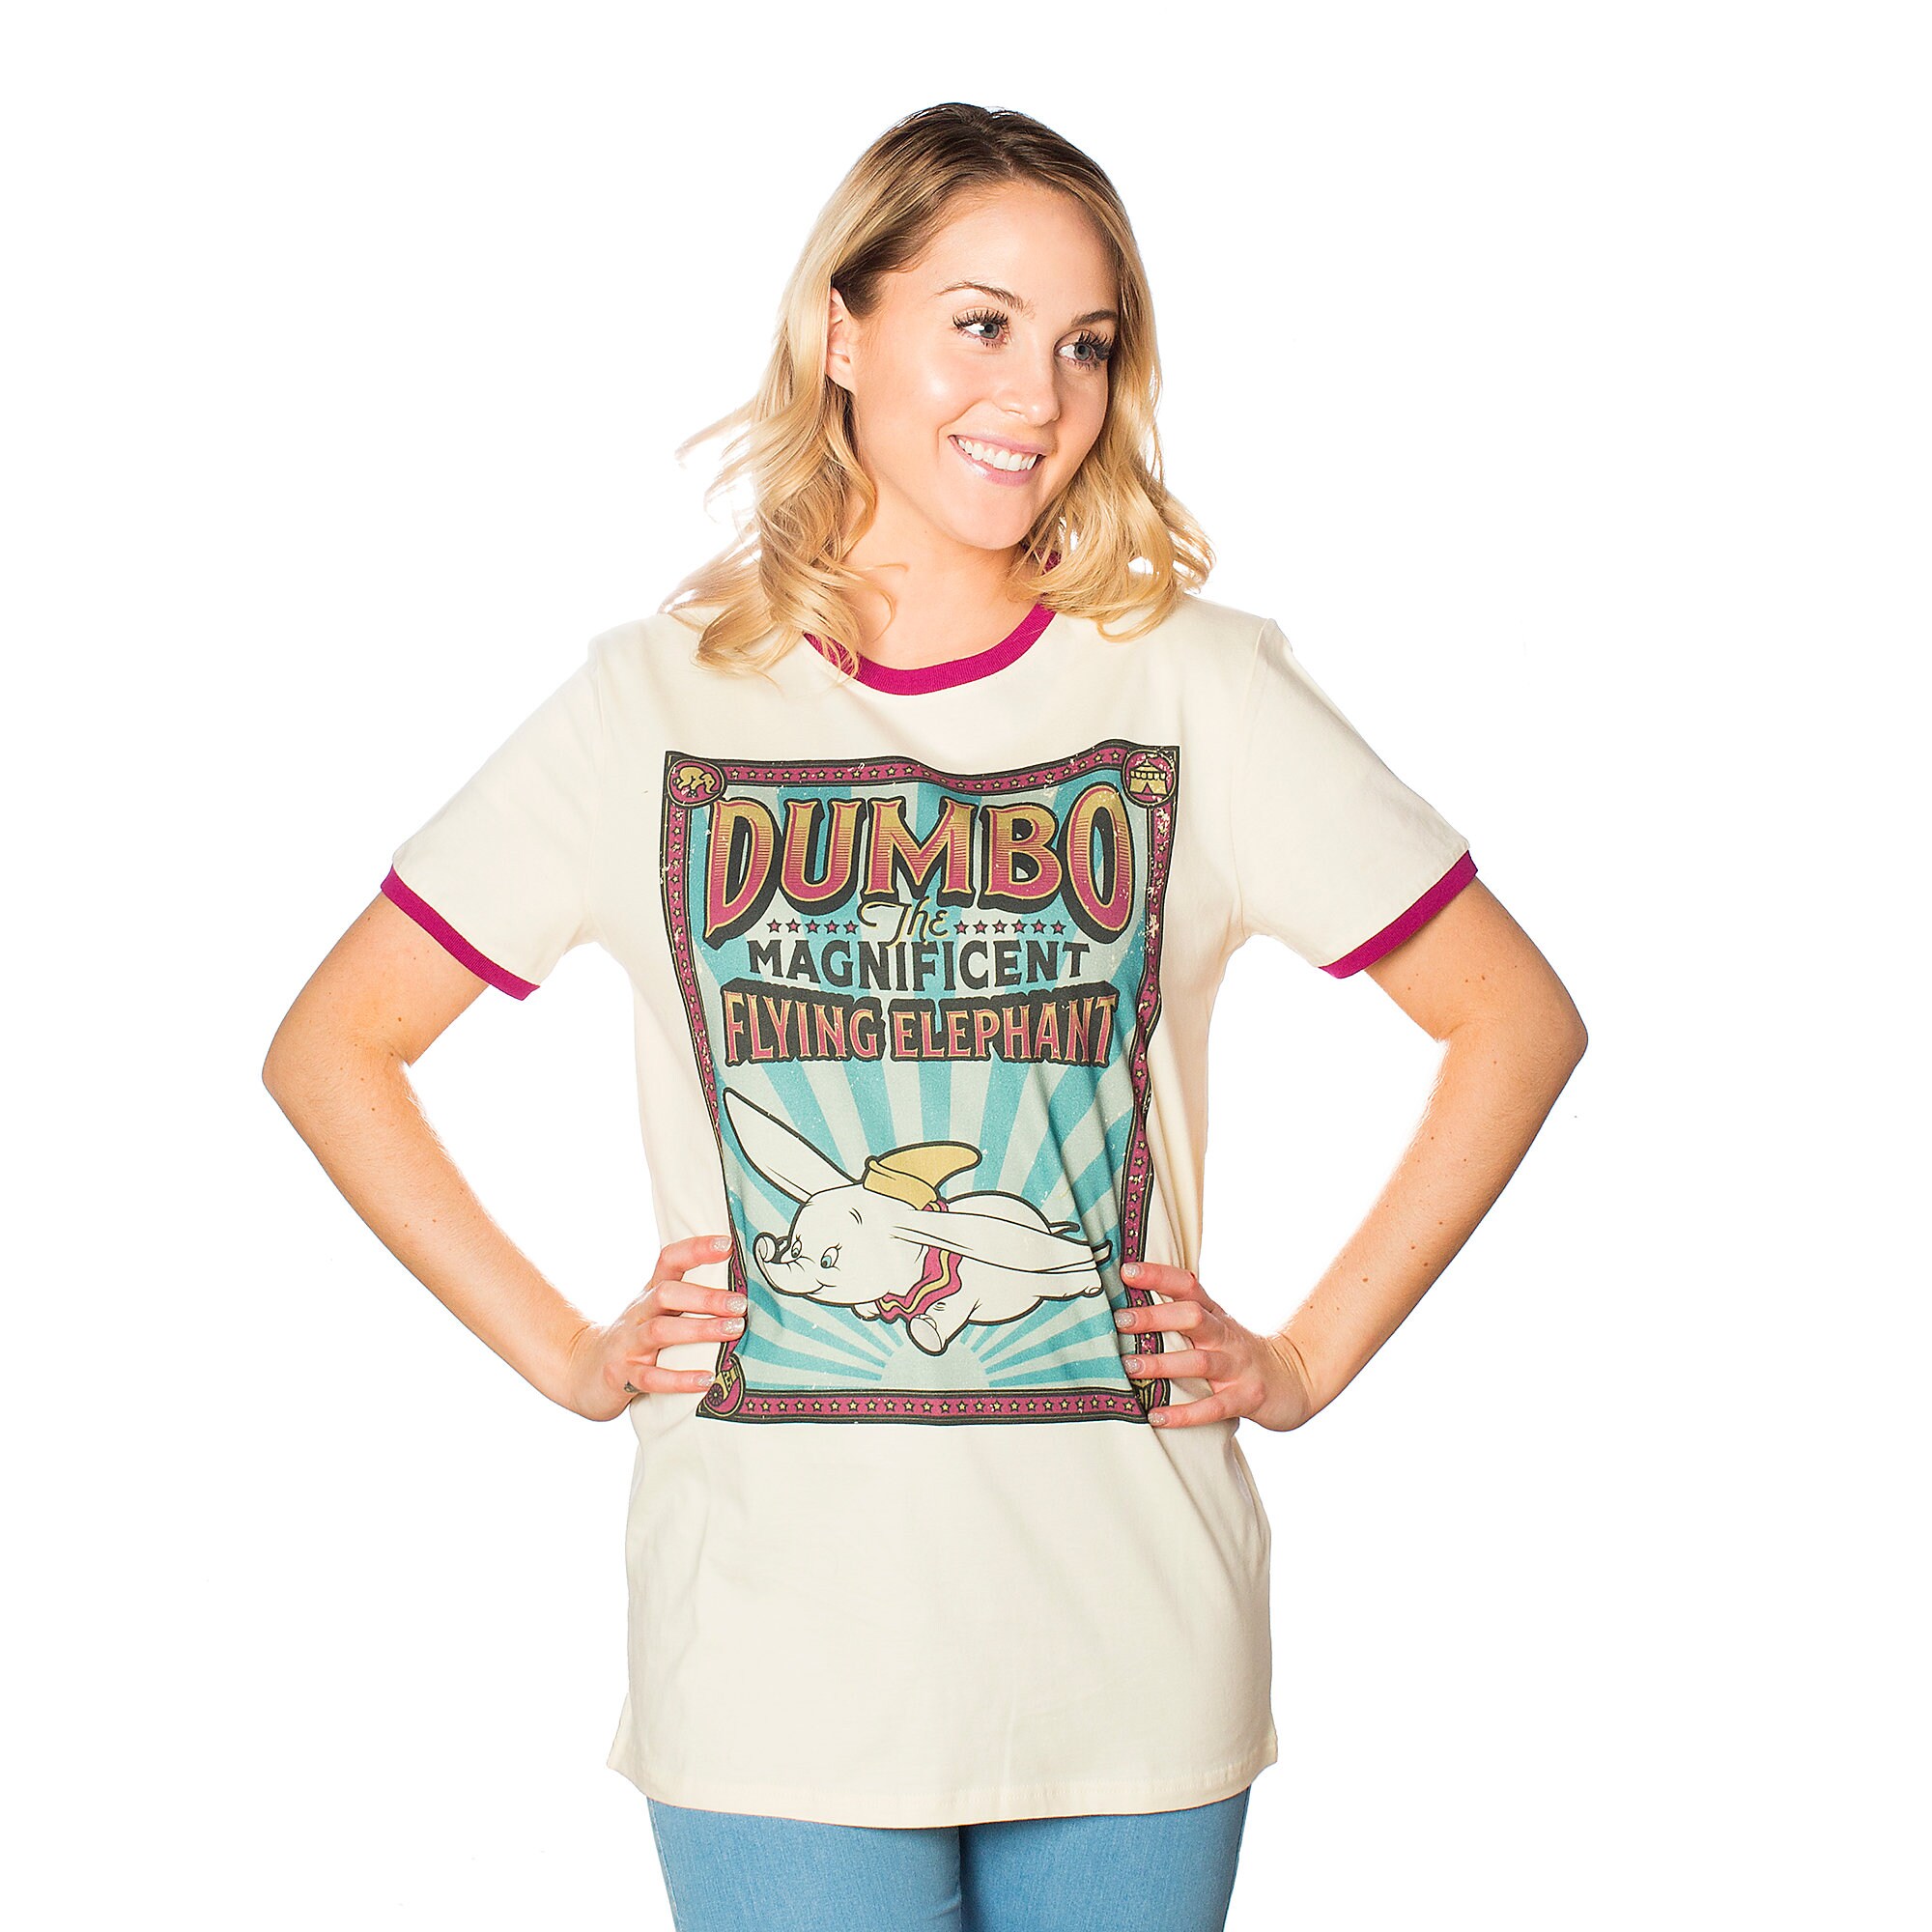 Dumbo Ringer T-Shirt for Adults by Cakeworthy